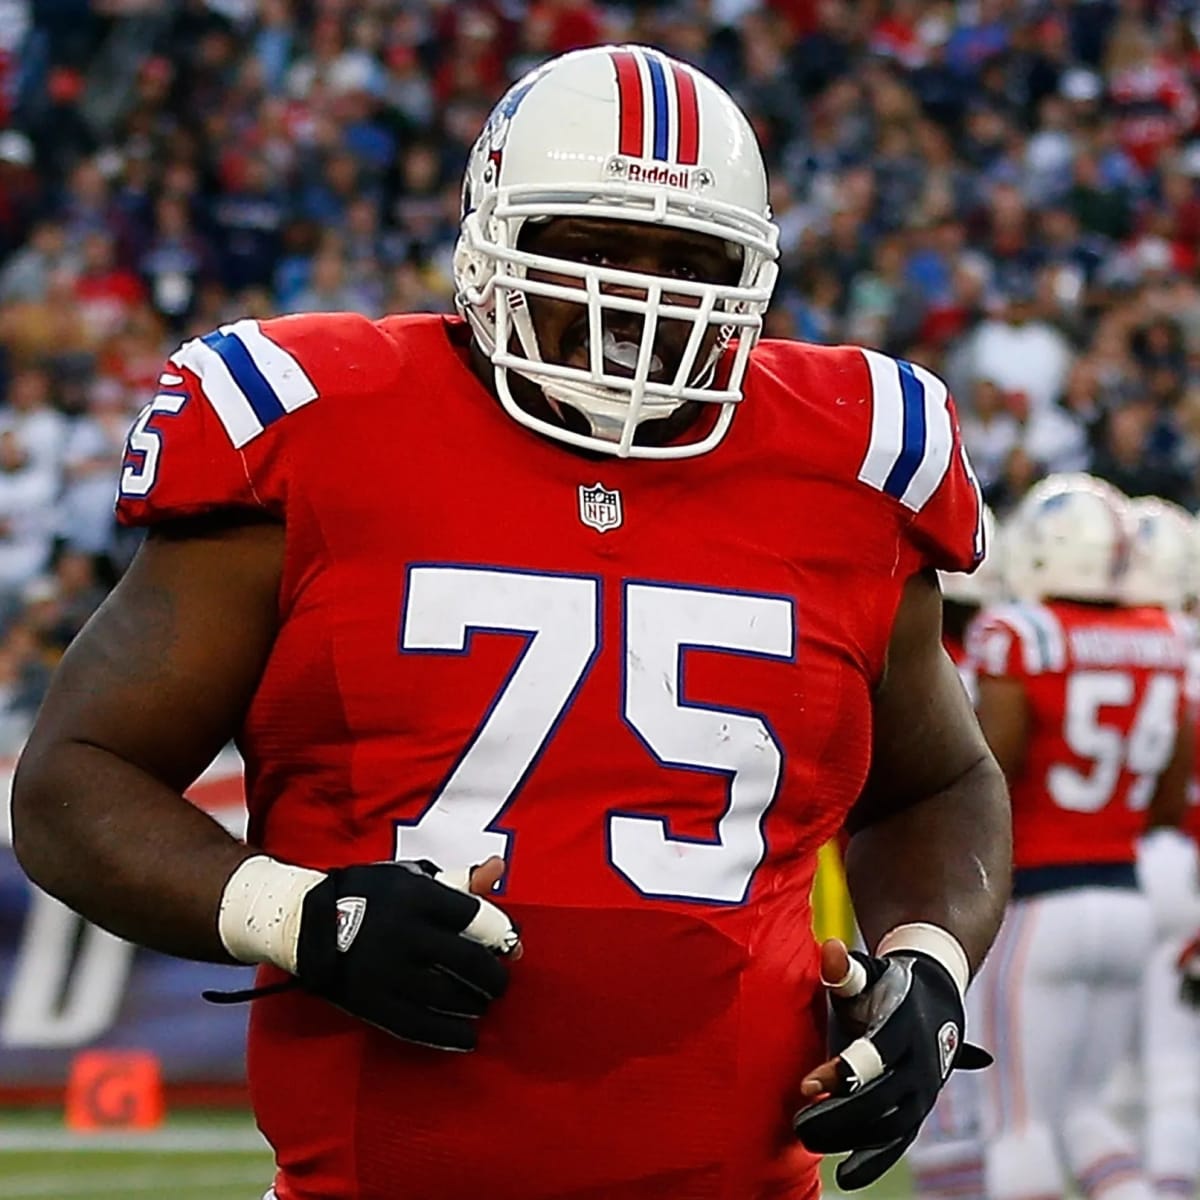 Former Patriots standout Wilfork officially retires from NFL